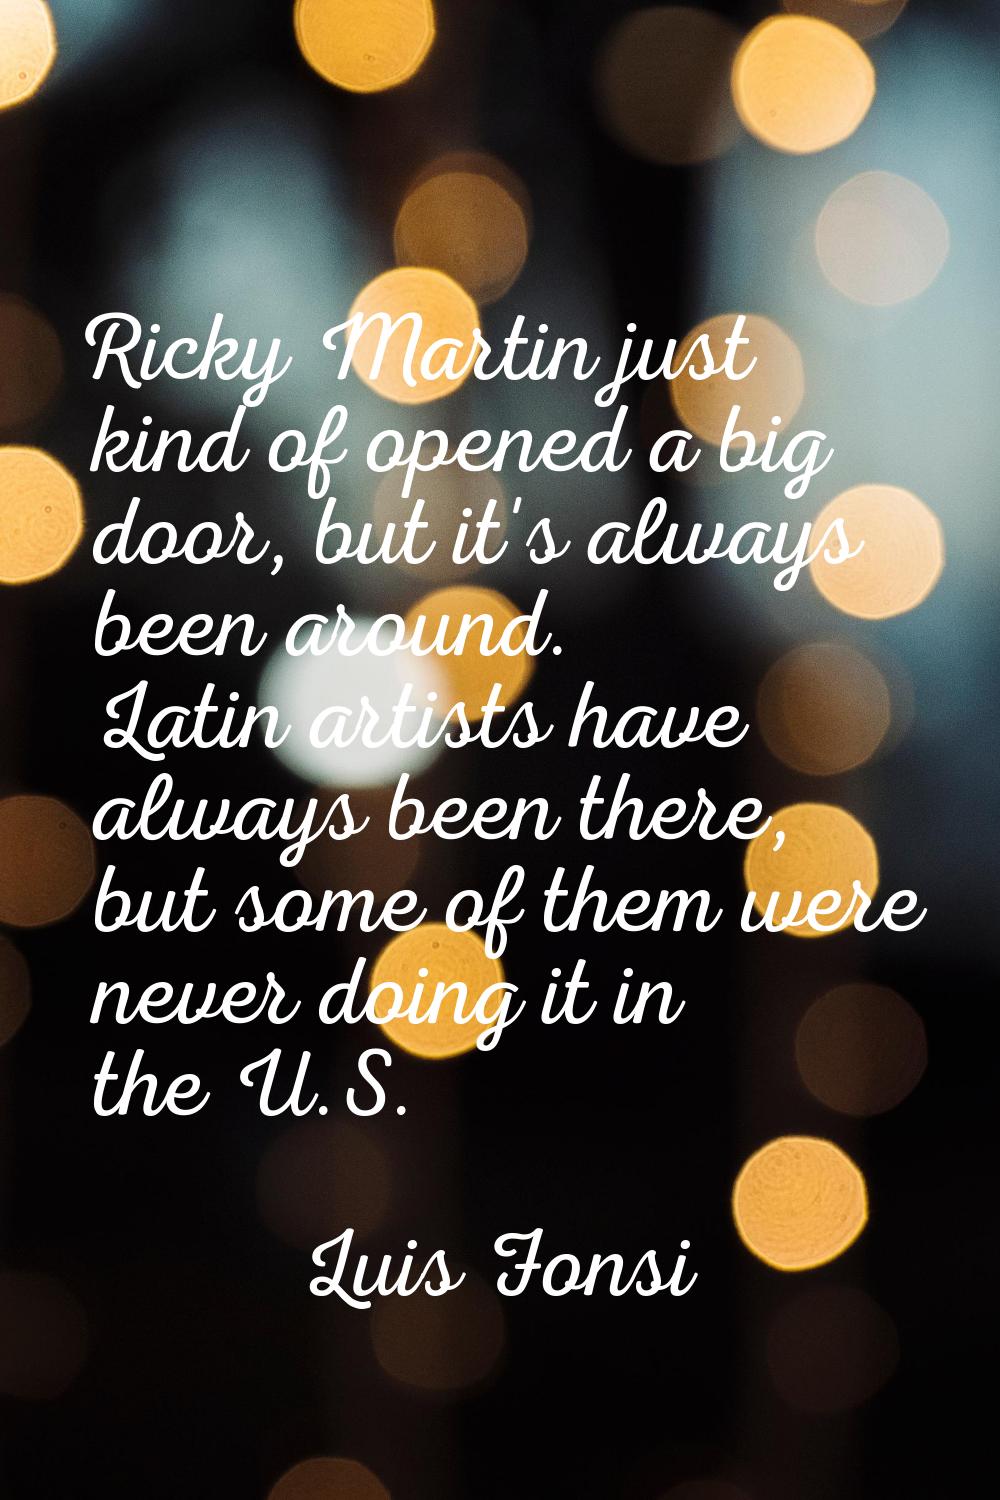 Ricky Martin just kind of opened a big door, but it's always been around. Latin artists have always